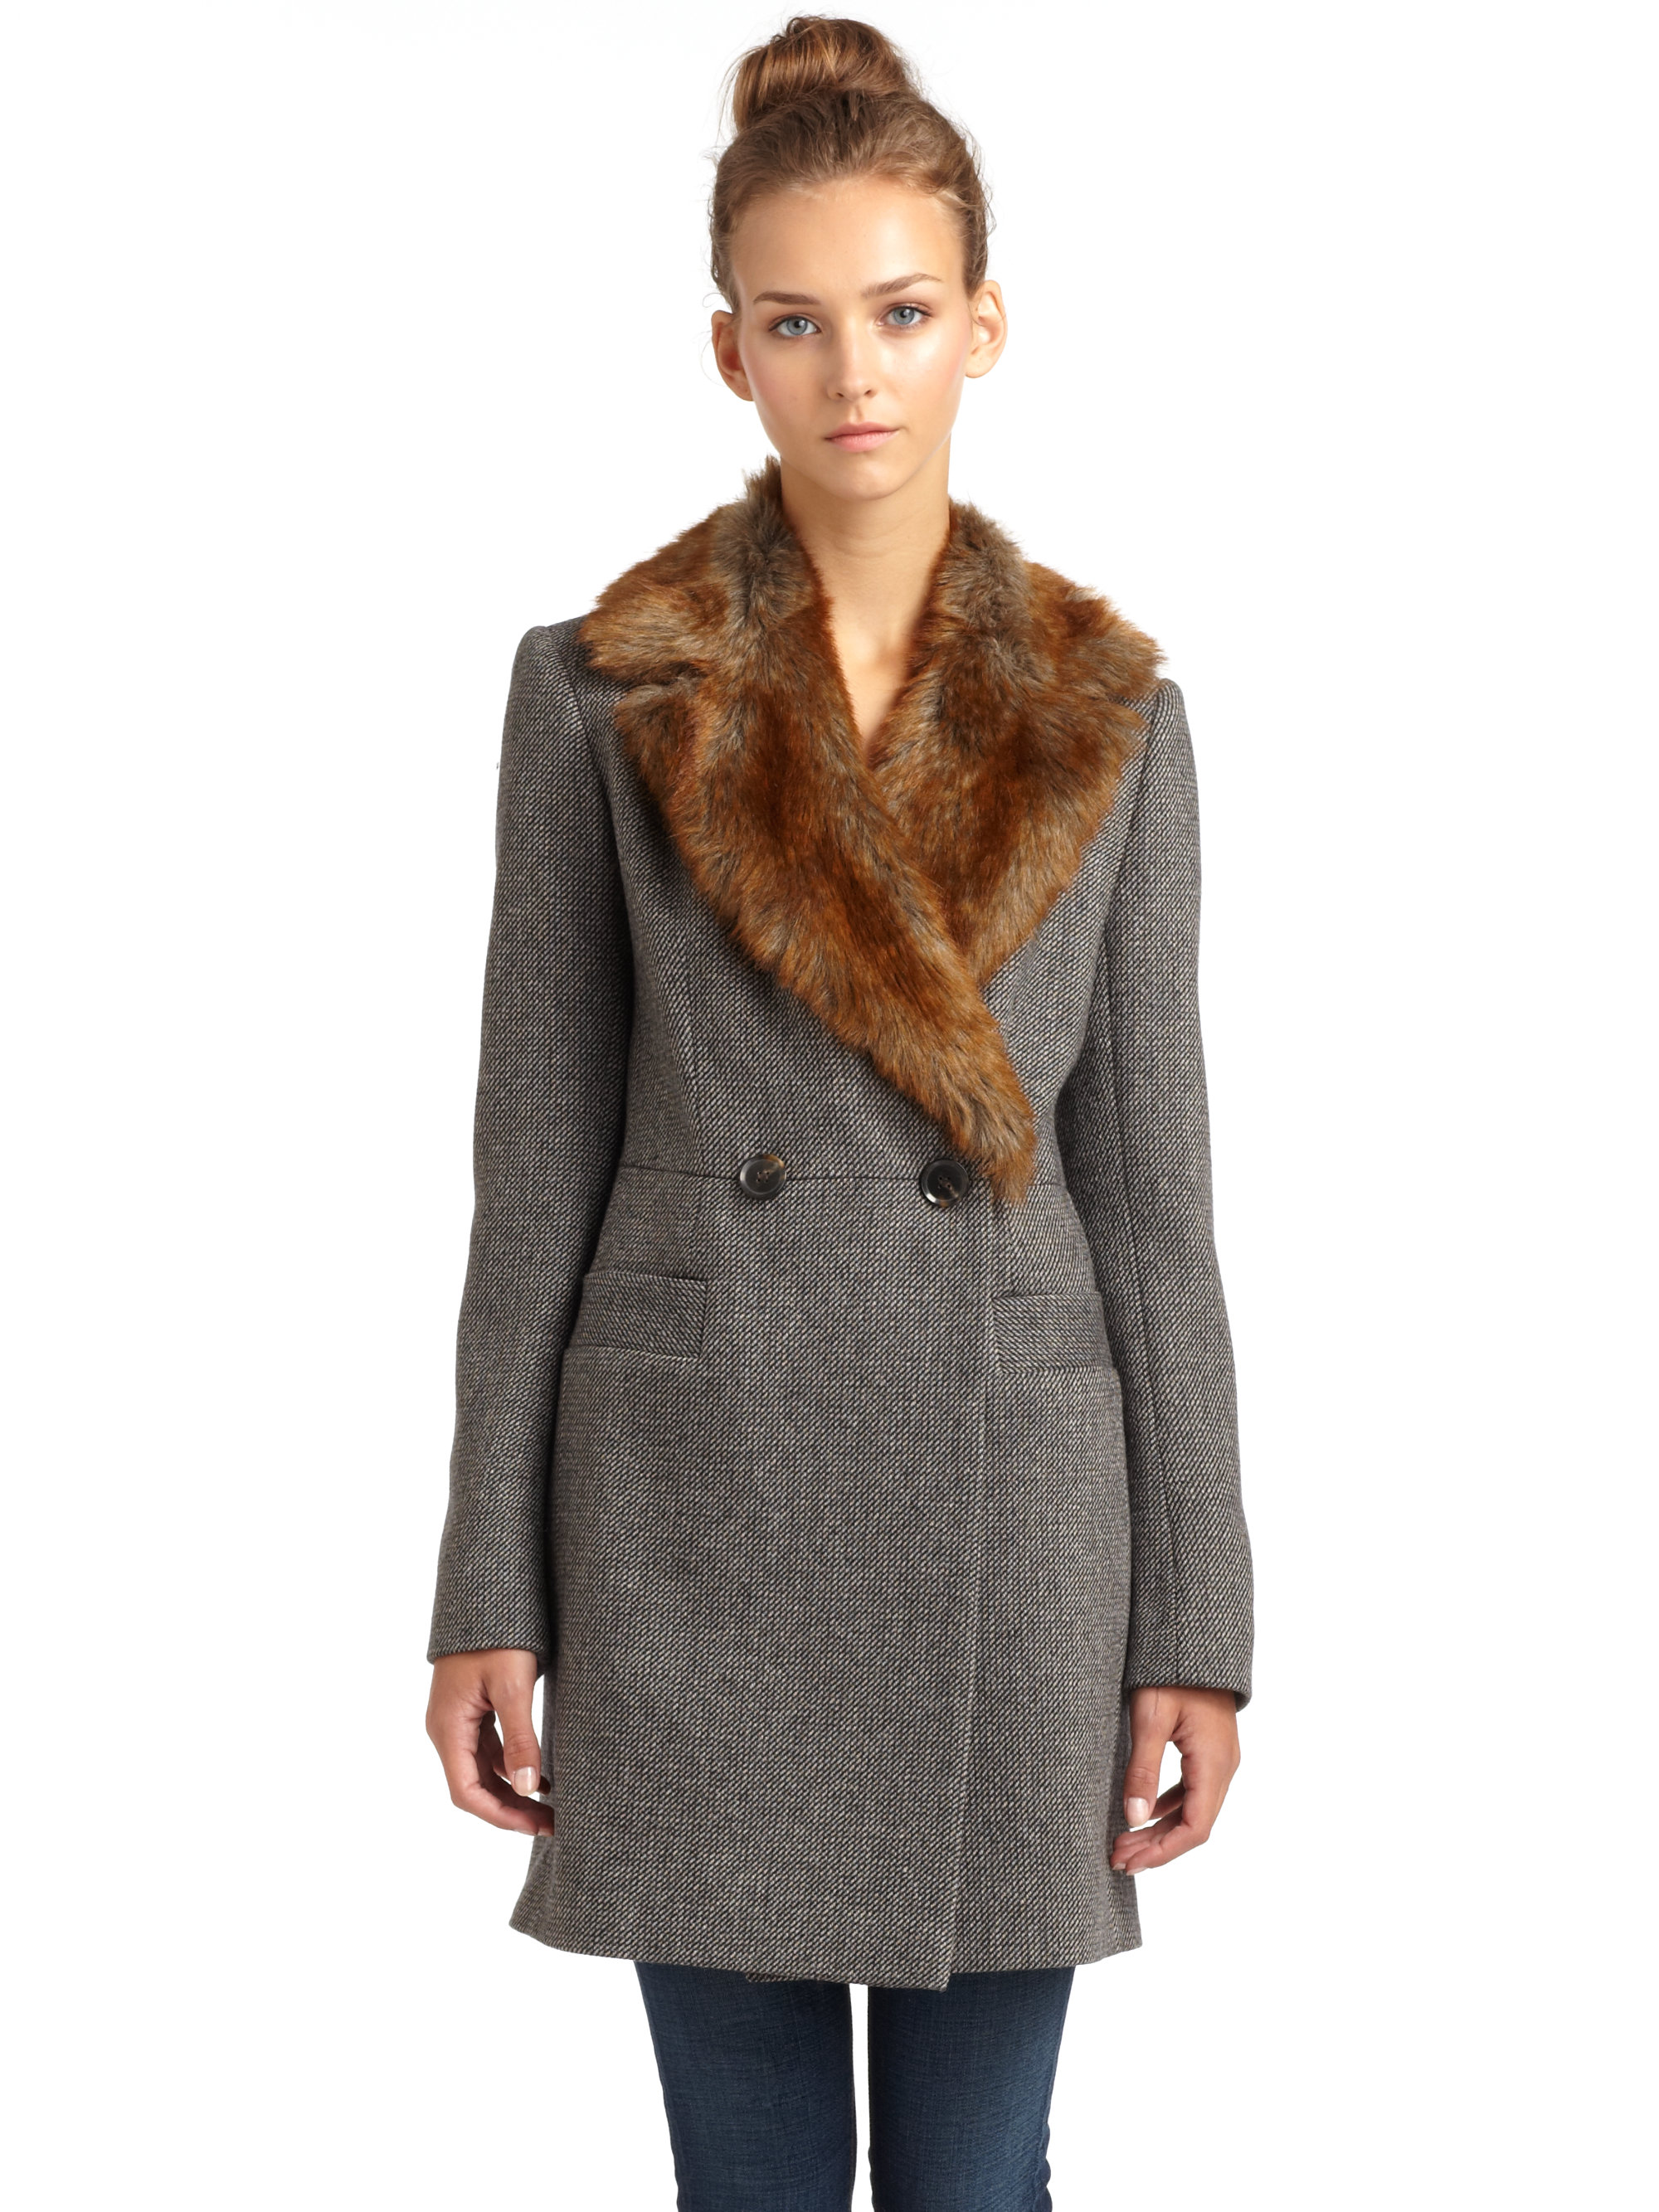 Lyst - French Connection Anderson Fur Collar Coat in Gray